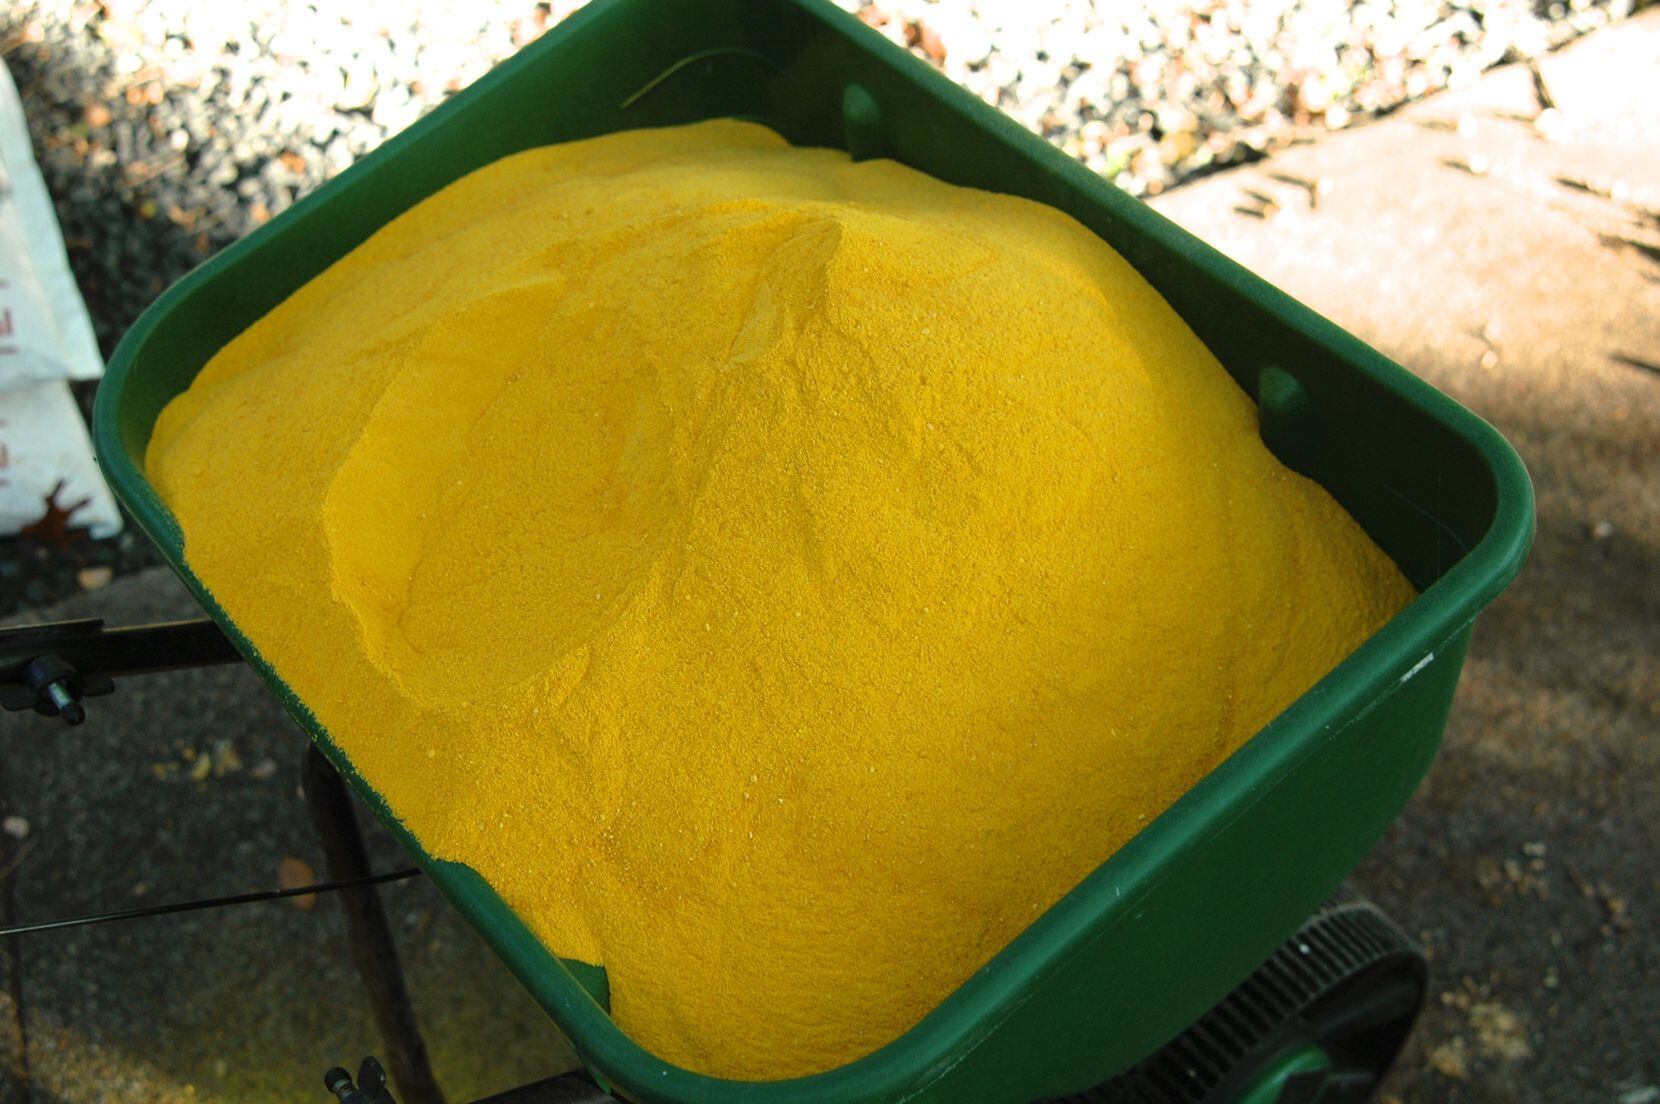 The powdered form of corn gluten meal is very effective but also messy to use.